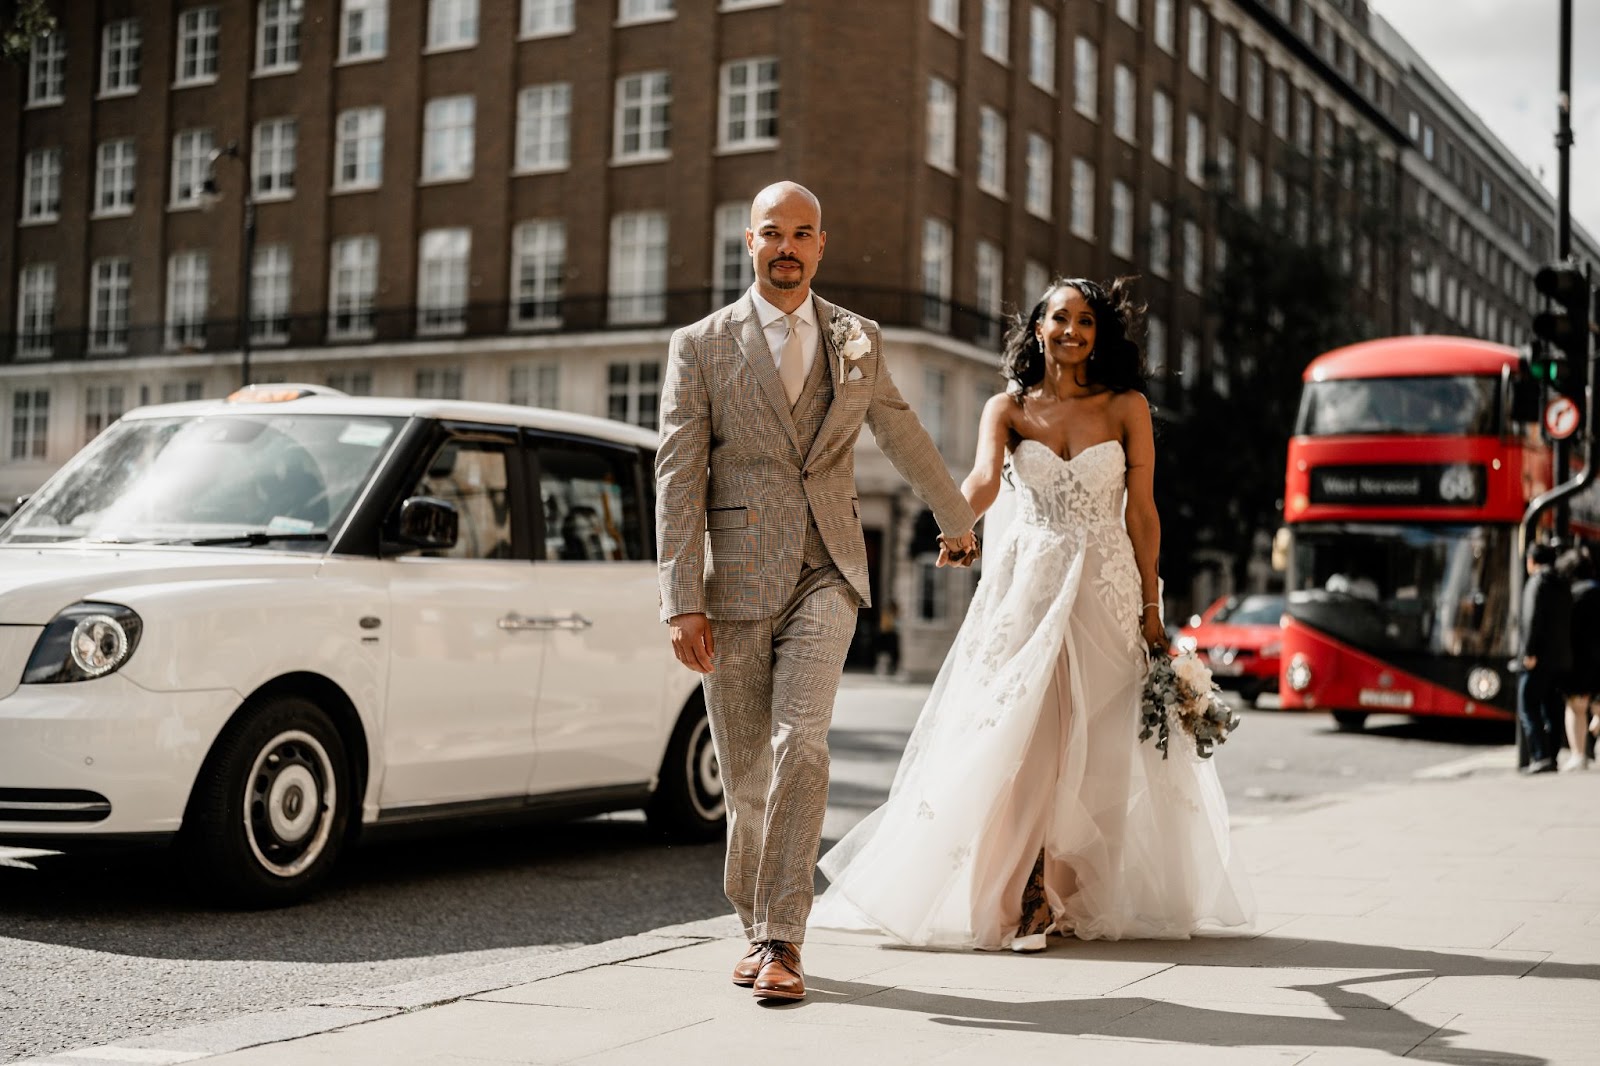 Groom leading bride down street of London, red bus in the background